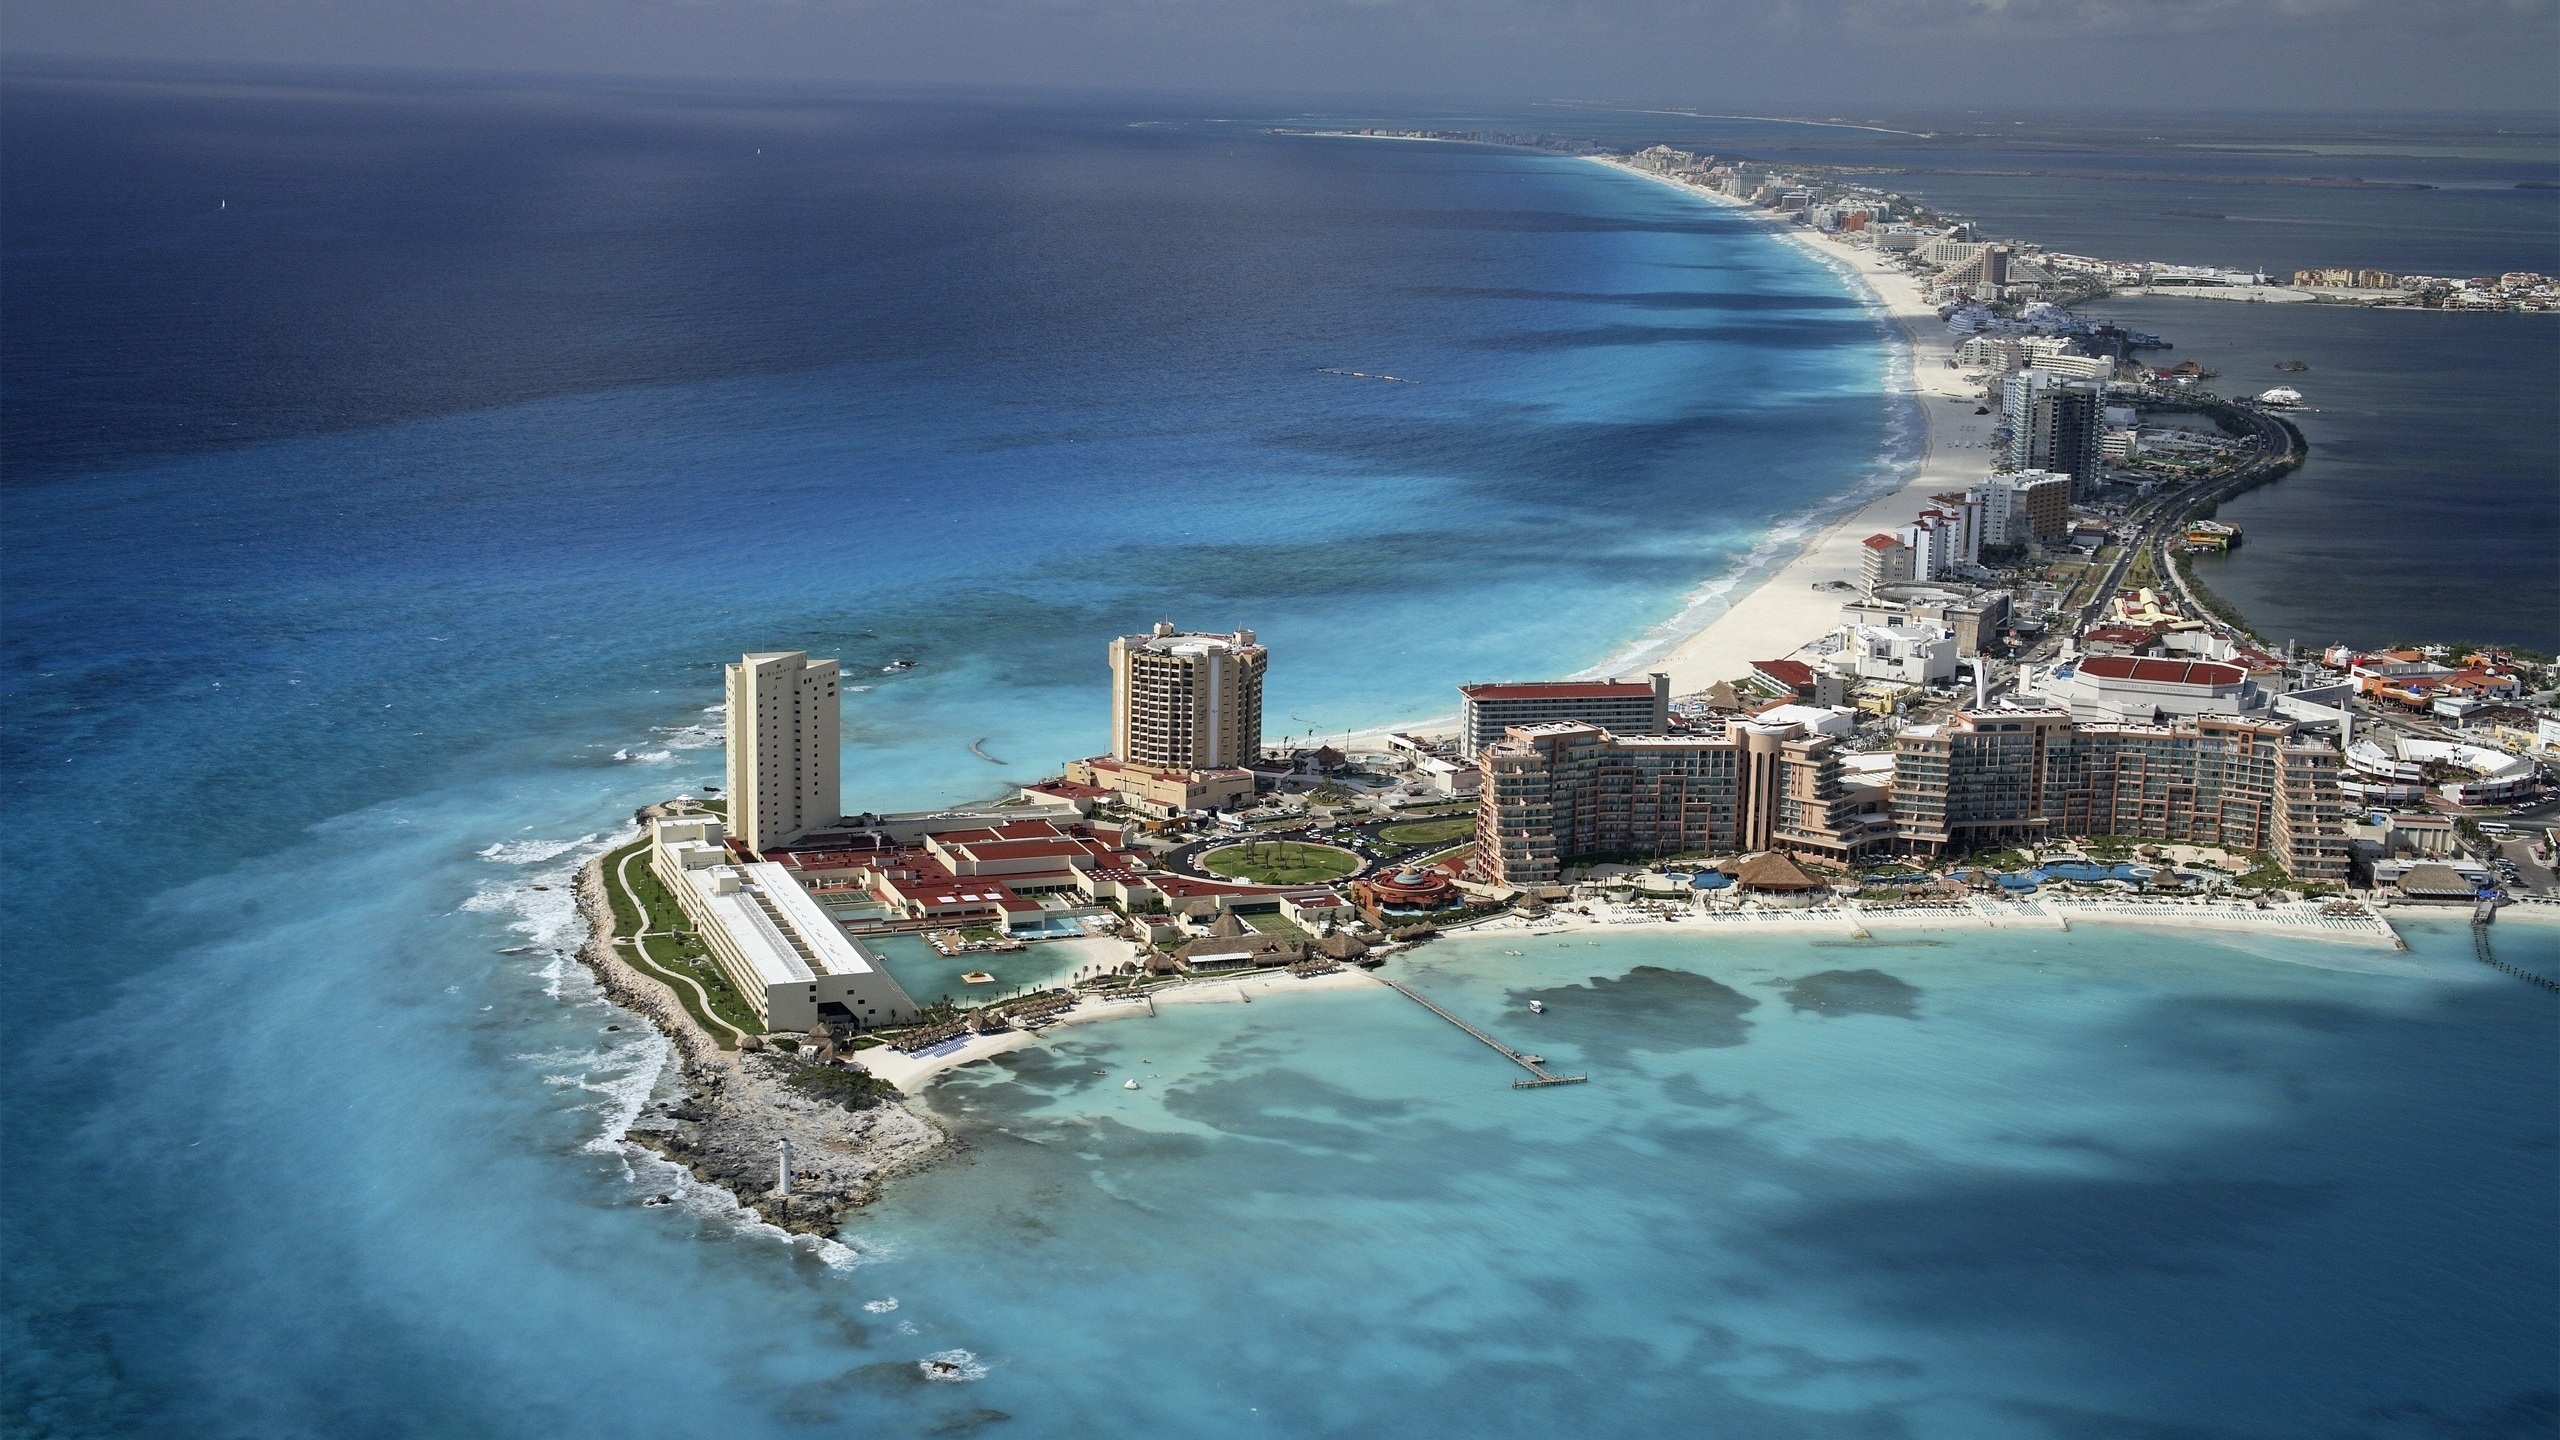 Cancun Mexico for 2560x1440 HDTV resolution